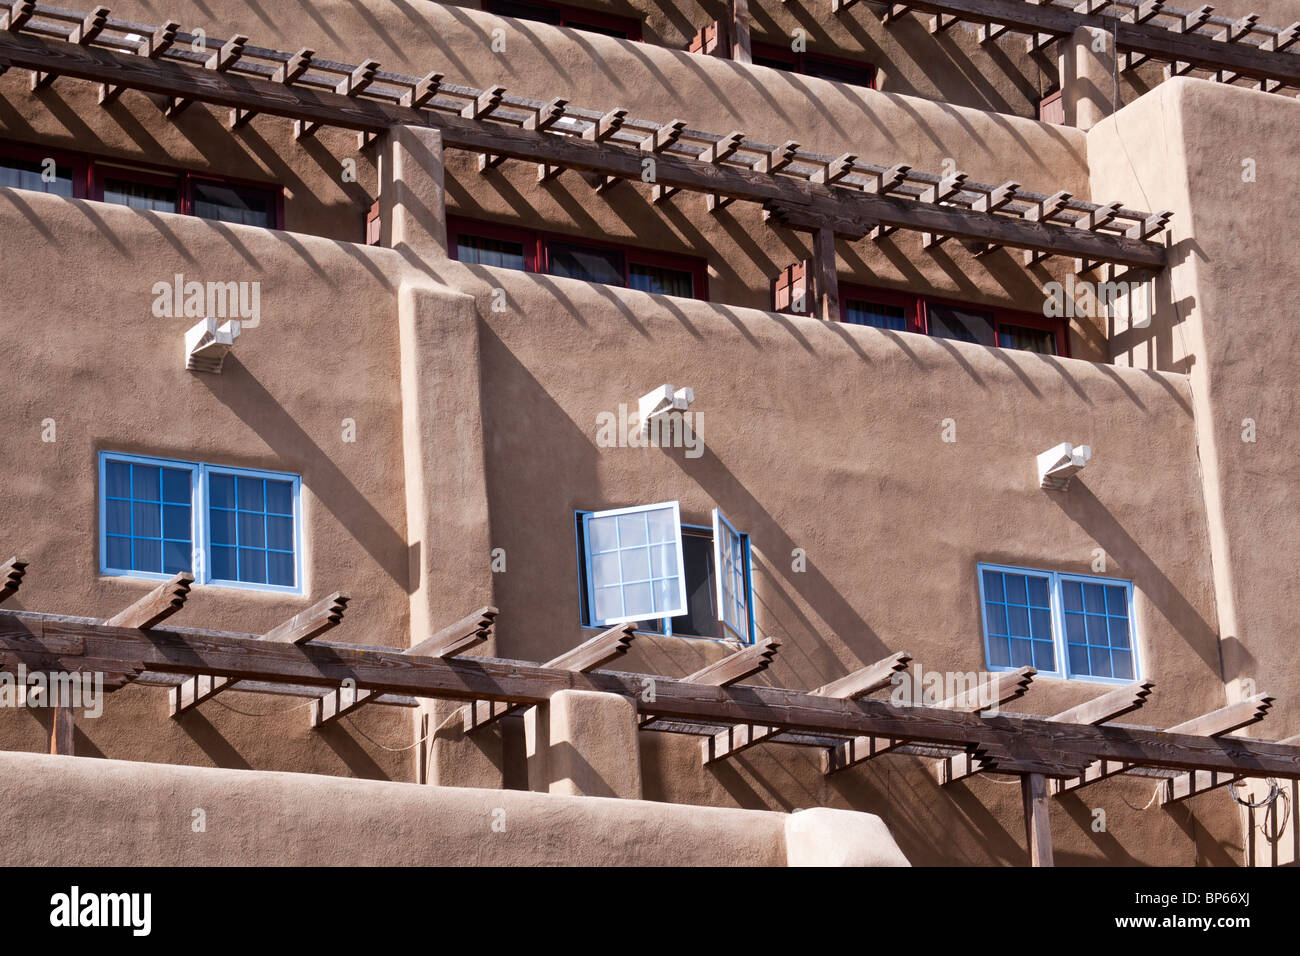 Three windows and many vigas casting shadows on a building in the Pueblo revival style architecture in Santa Fe, New Mexico Stock Photo